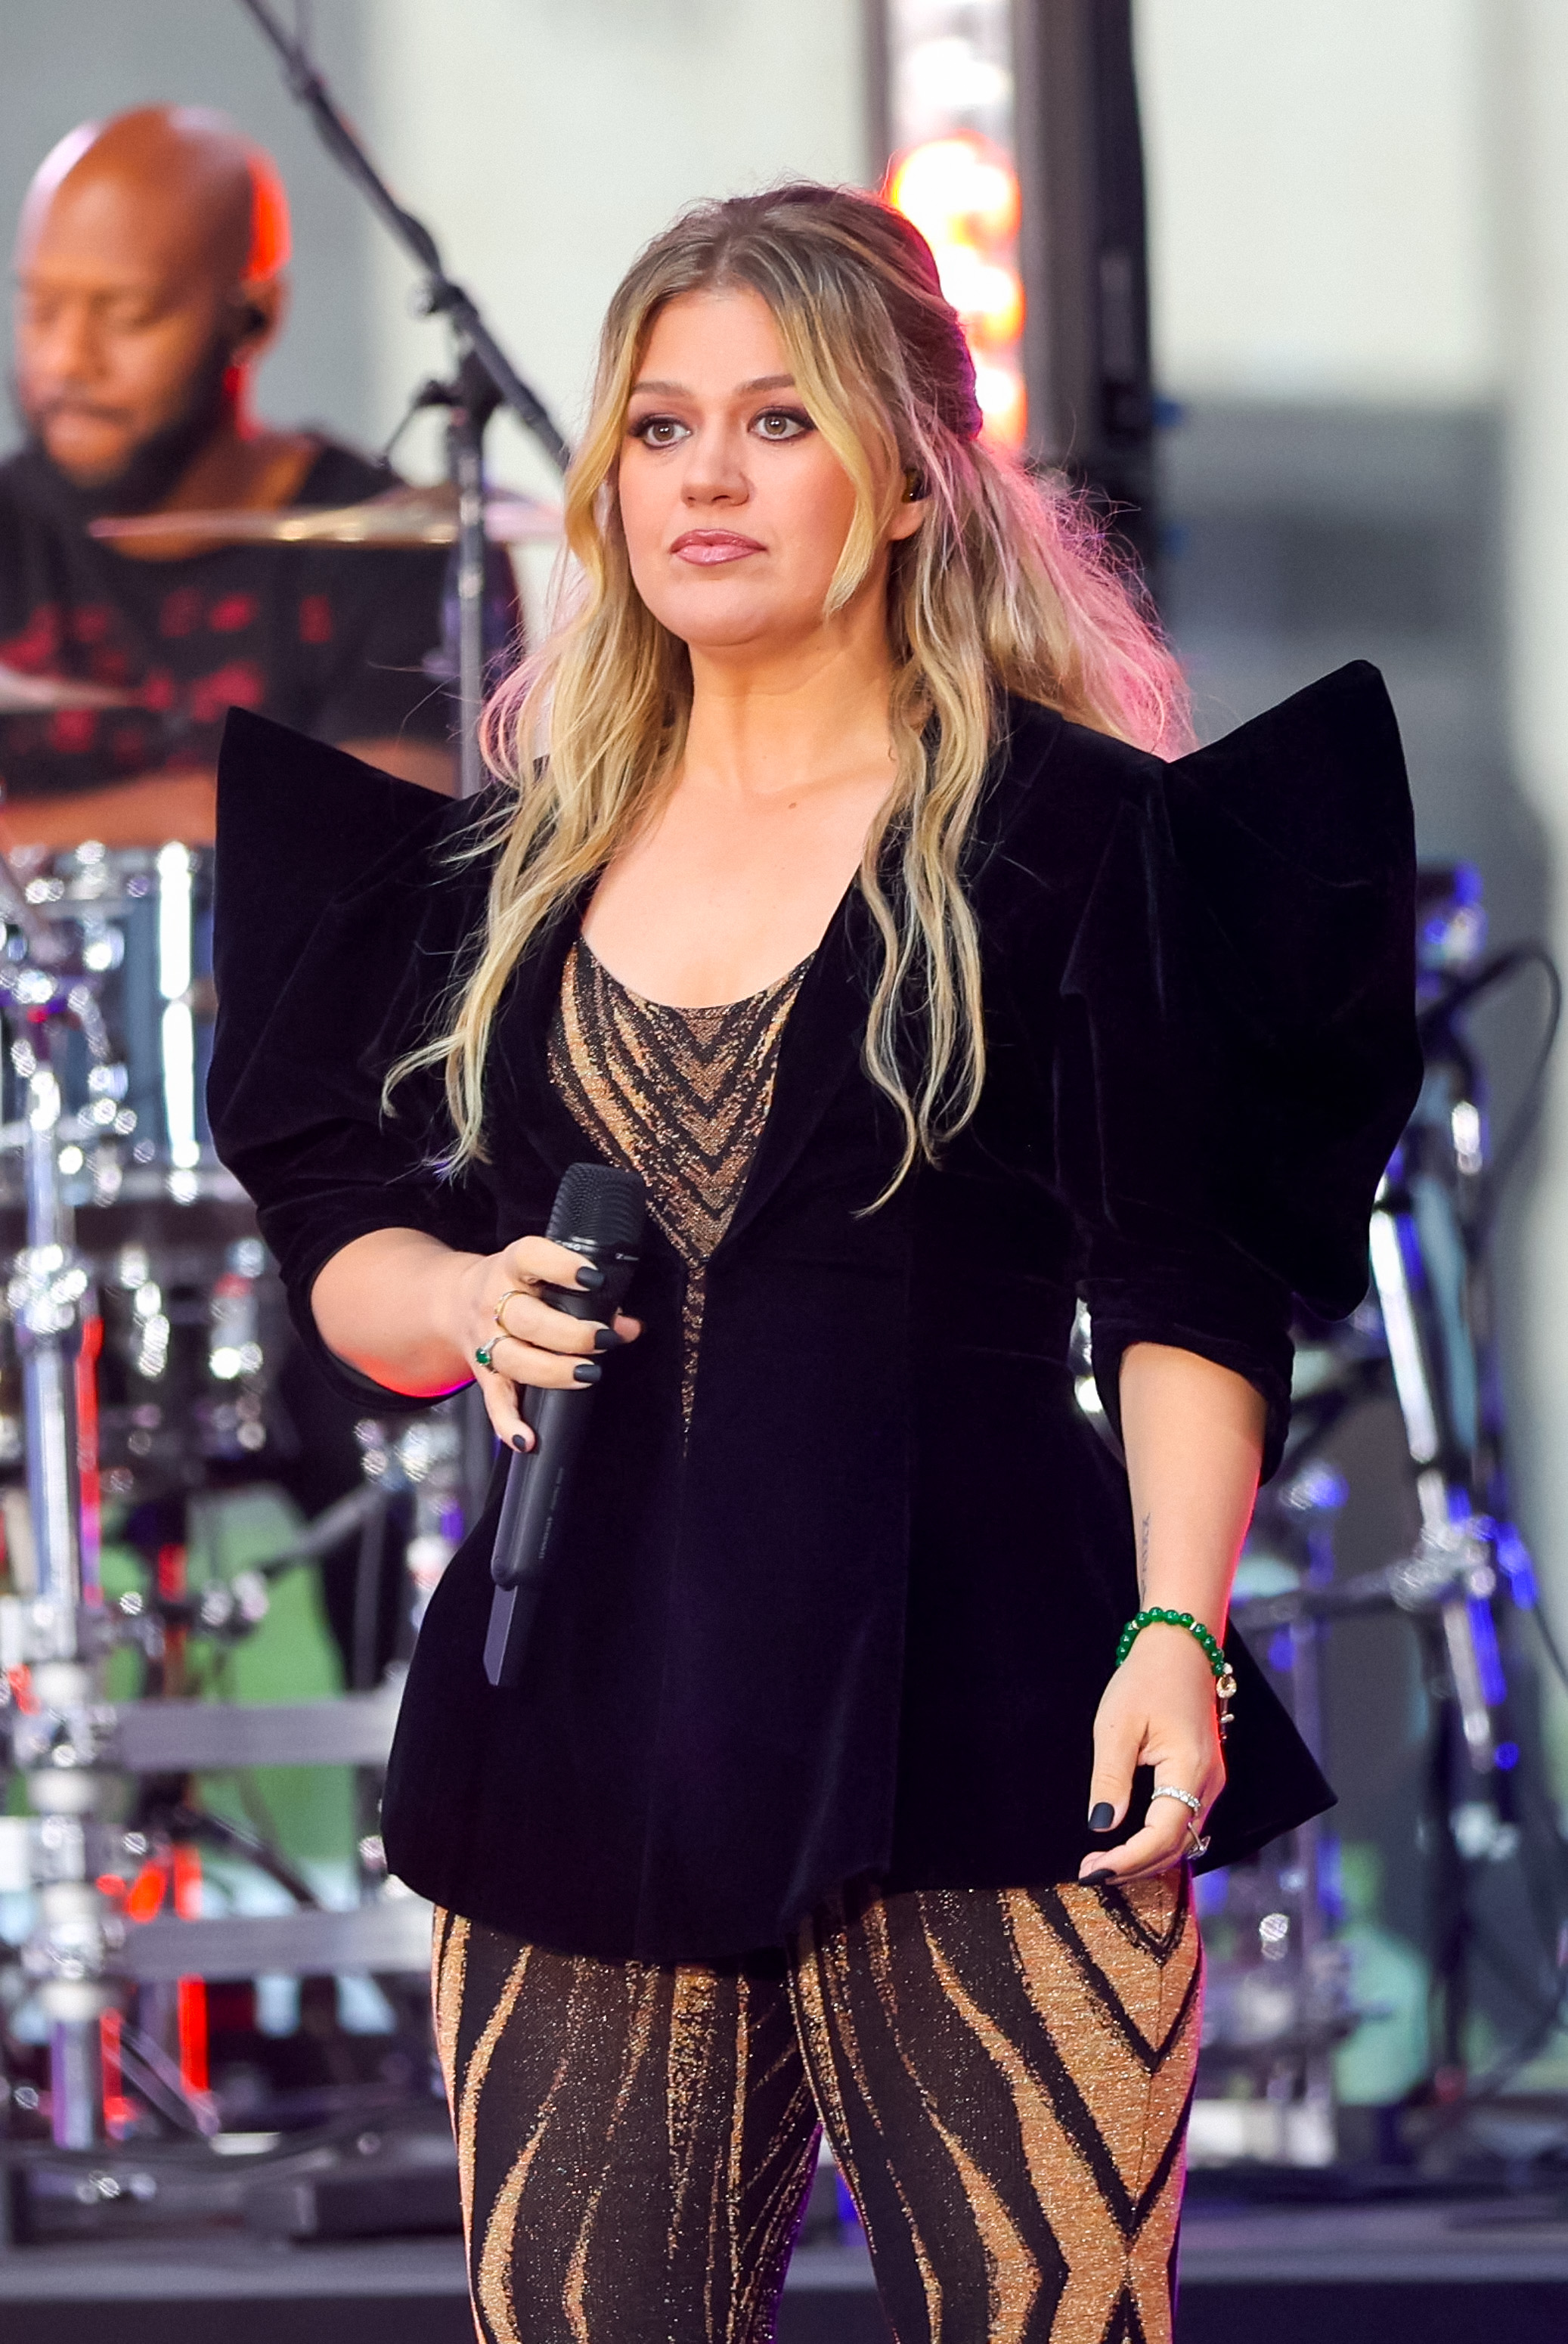 Kelly Clarkson performing at the Citi Concert Series for the "Today" Show in New York City on September 22, 2023 | Source: Getty Images